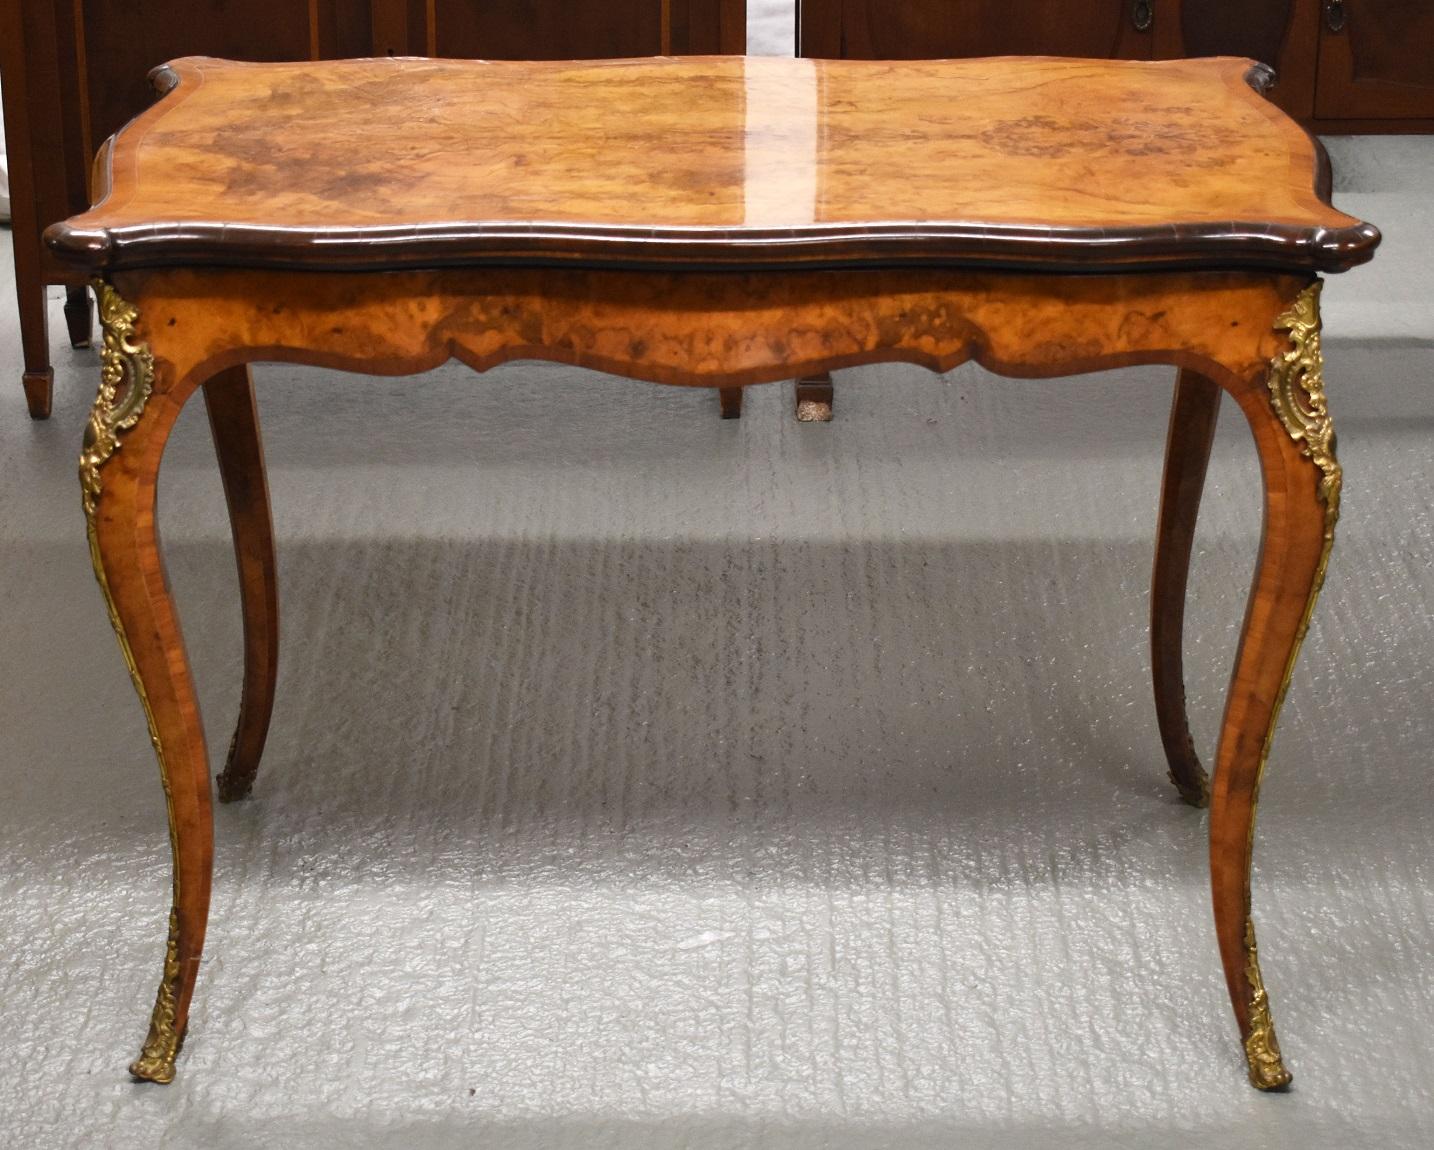 For sale is a very good quality French 19th century burr walnut fold over card table. The top of the table is banded around the edge and has cross grain mouldings, the top then swivels to reveal storage space for cards and games etc, the top then